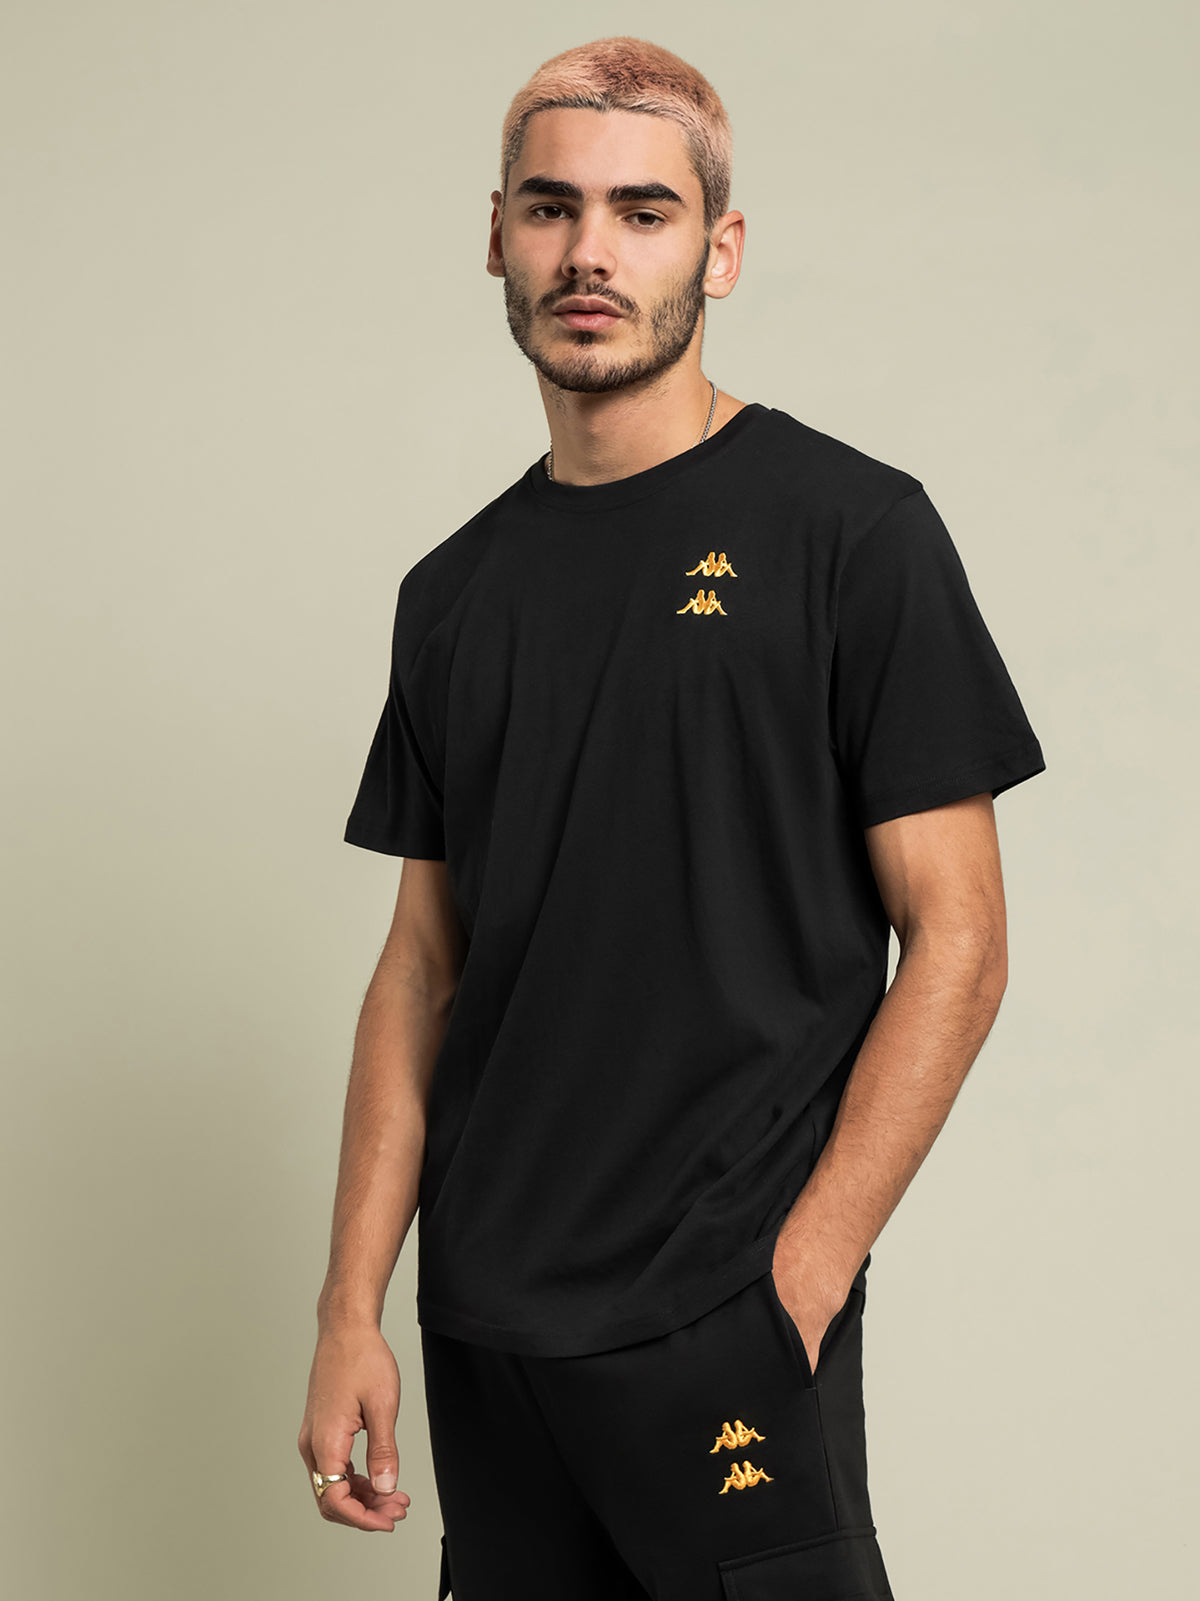 Authentic Damian T-Shirt in Black